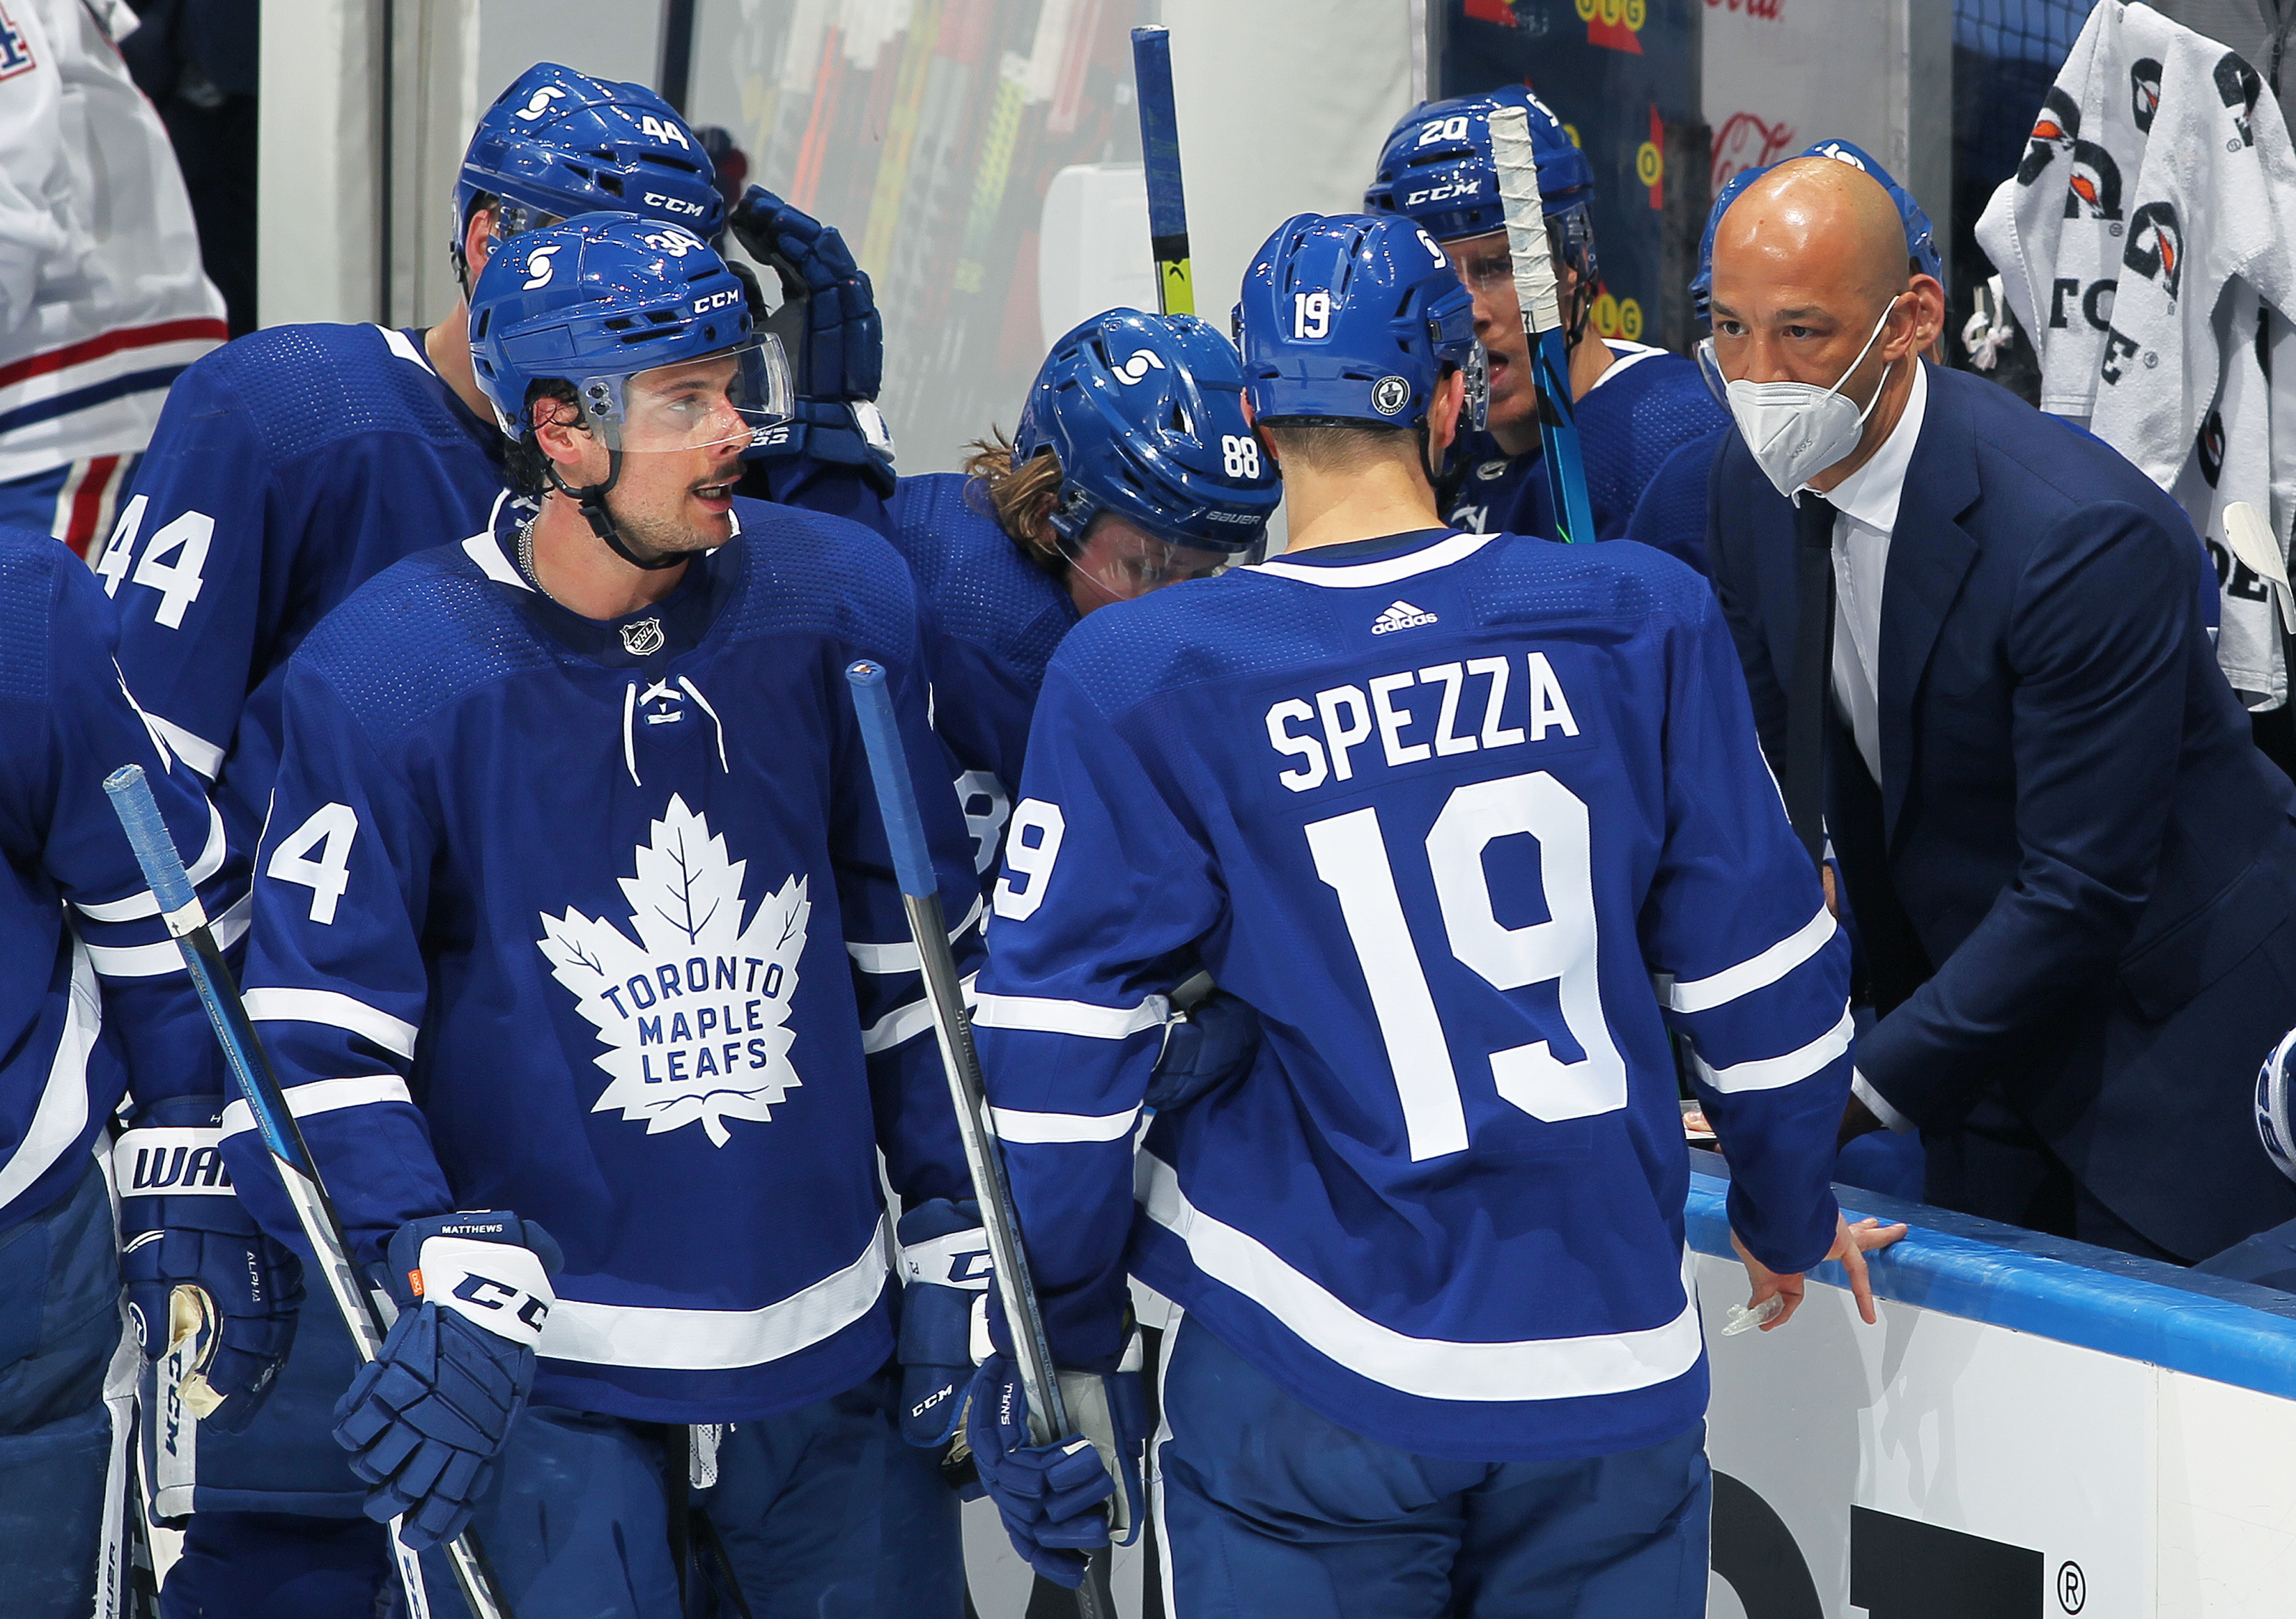 Toronto Maple Leafs 2021-22 Early Projected Lineup